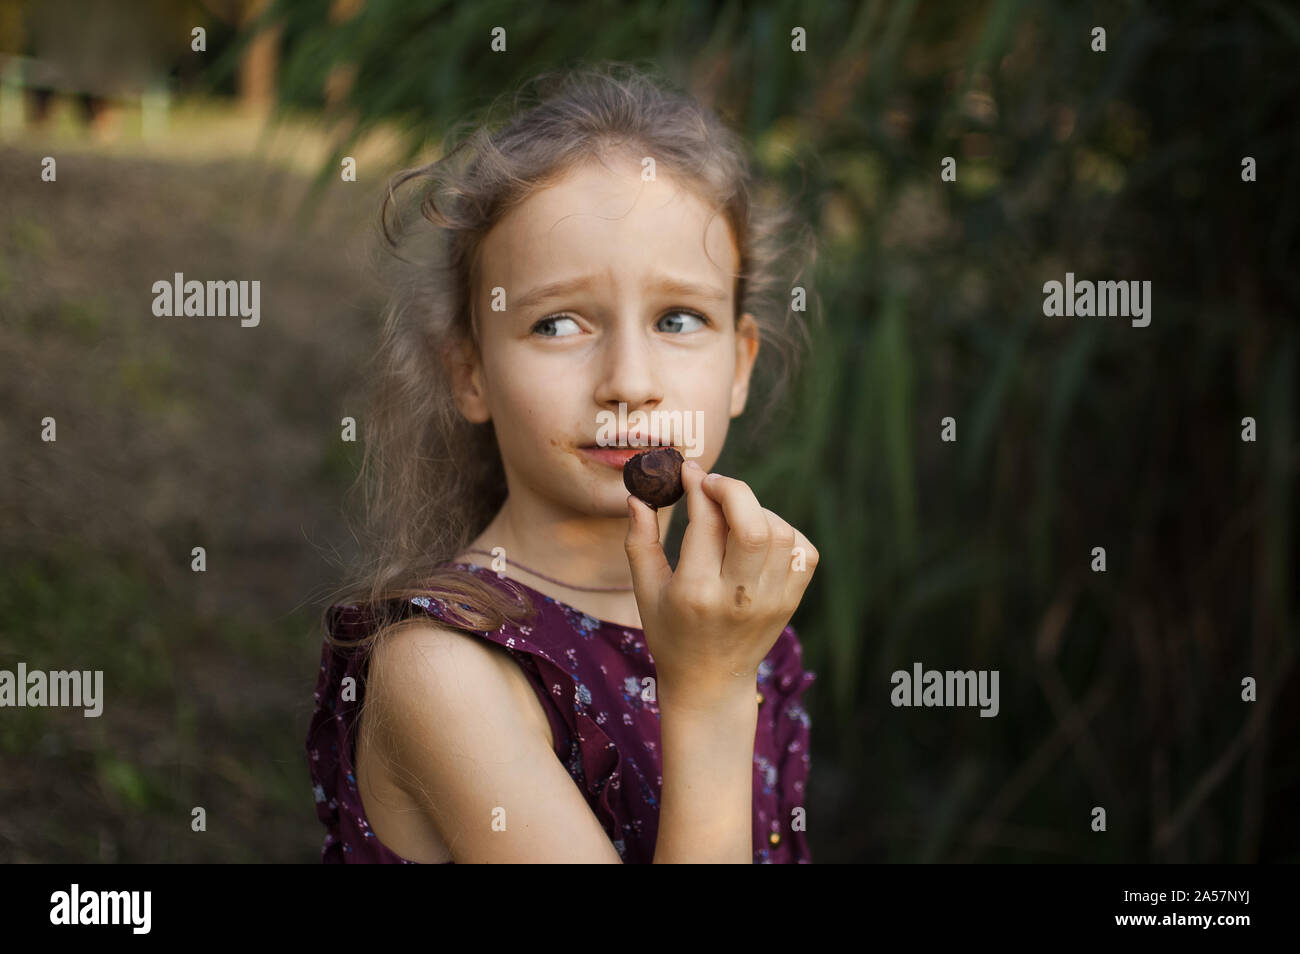 Beautiful little blond girl in violet dress with ponytail is eating a chocolate candy in the park durring a day, sugar addiction concept Stock Photo